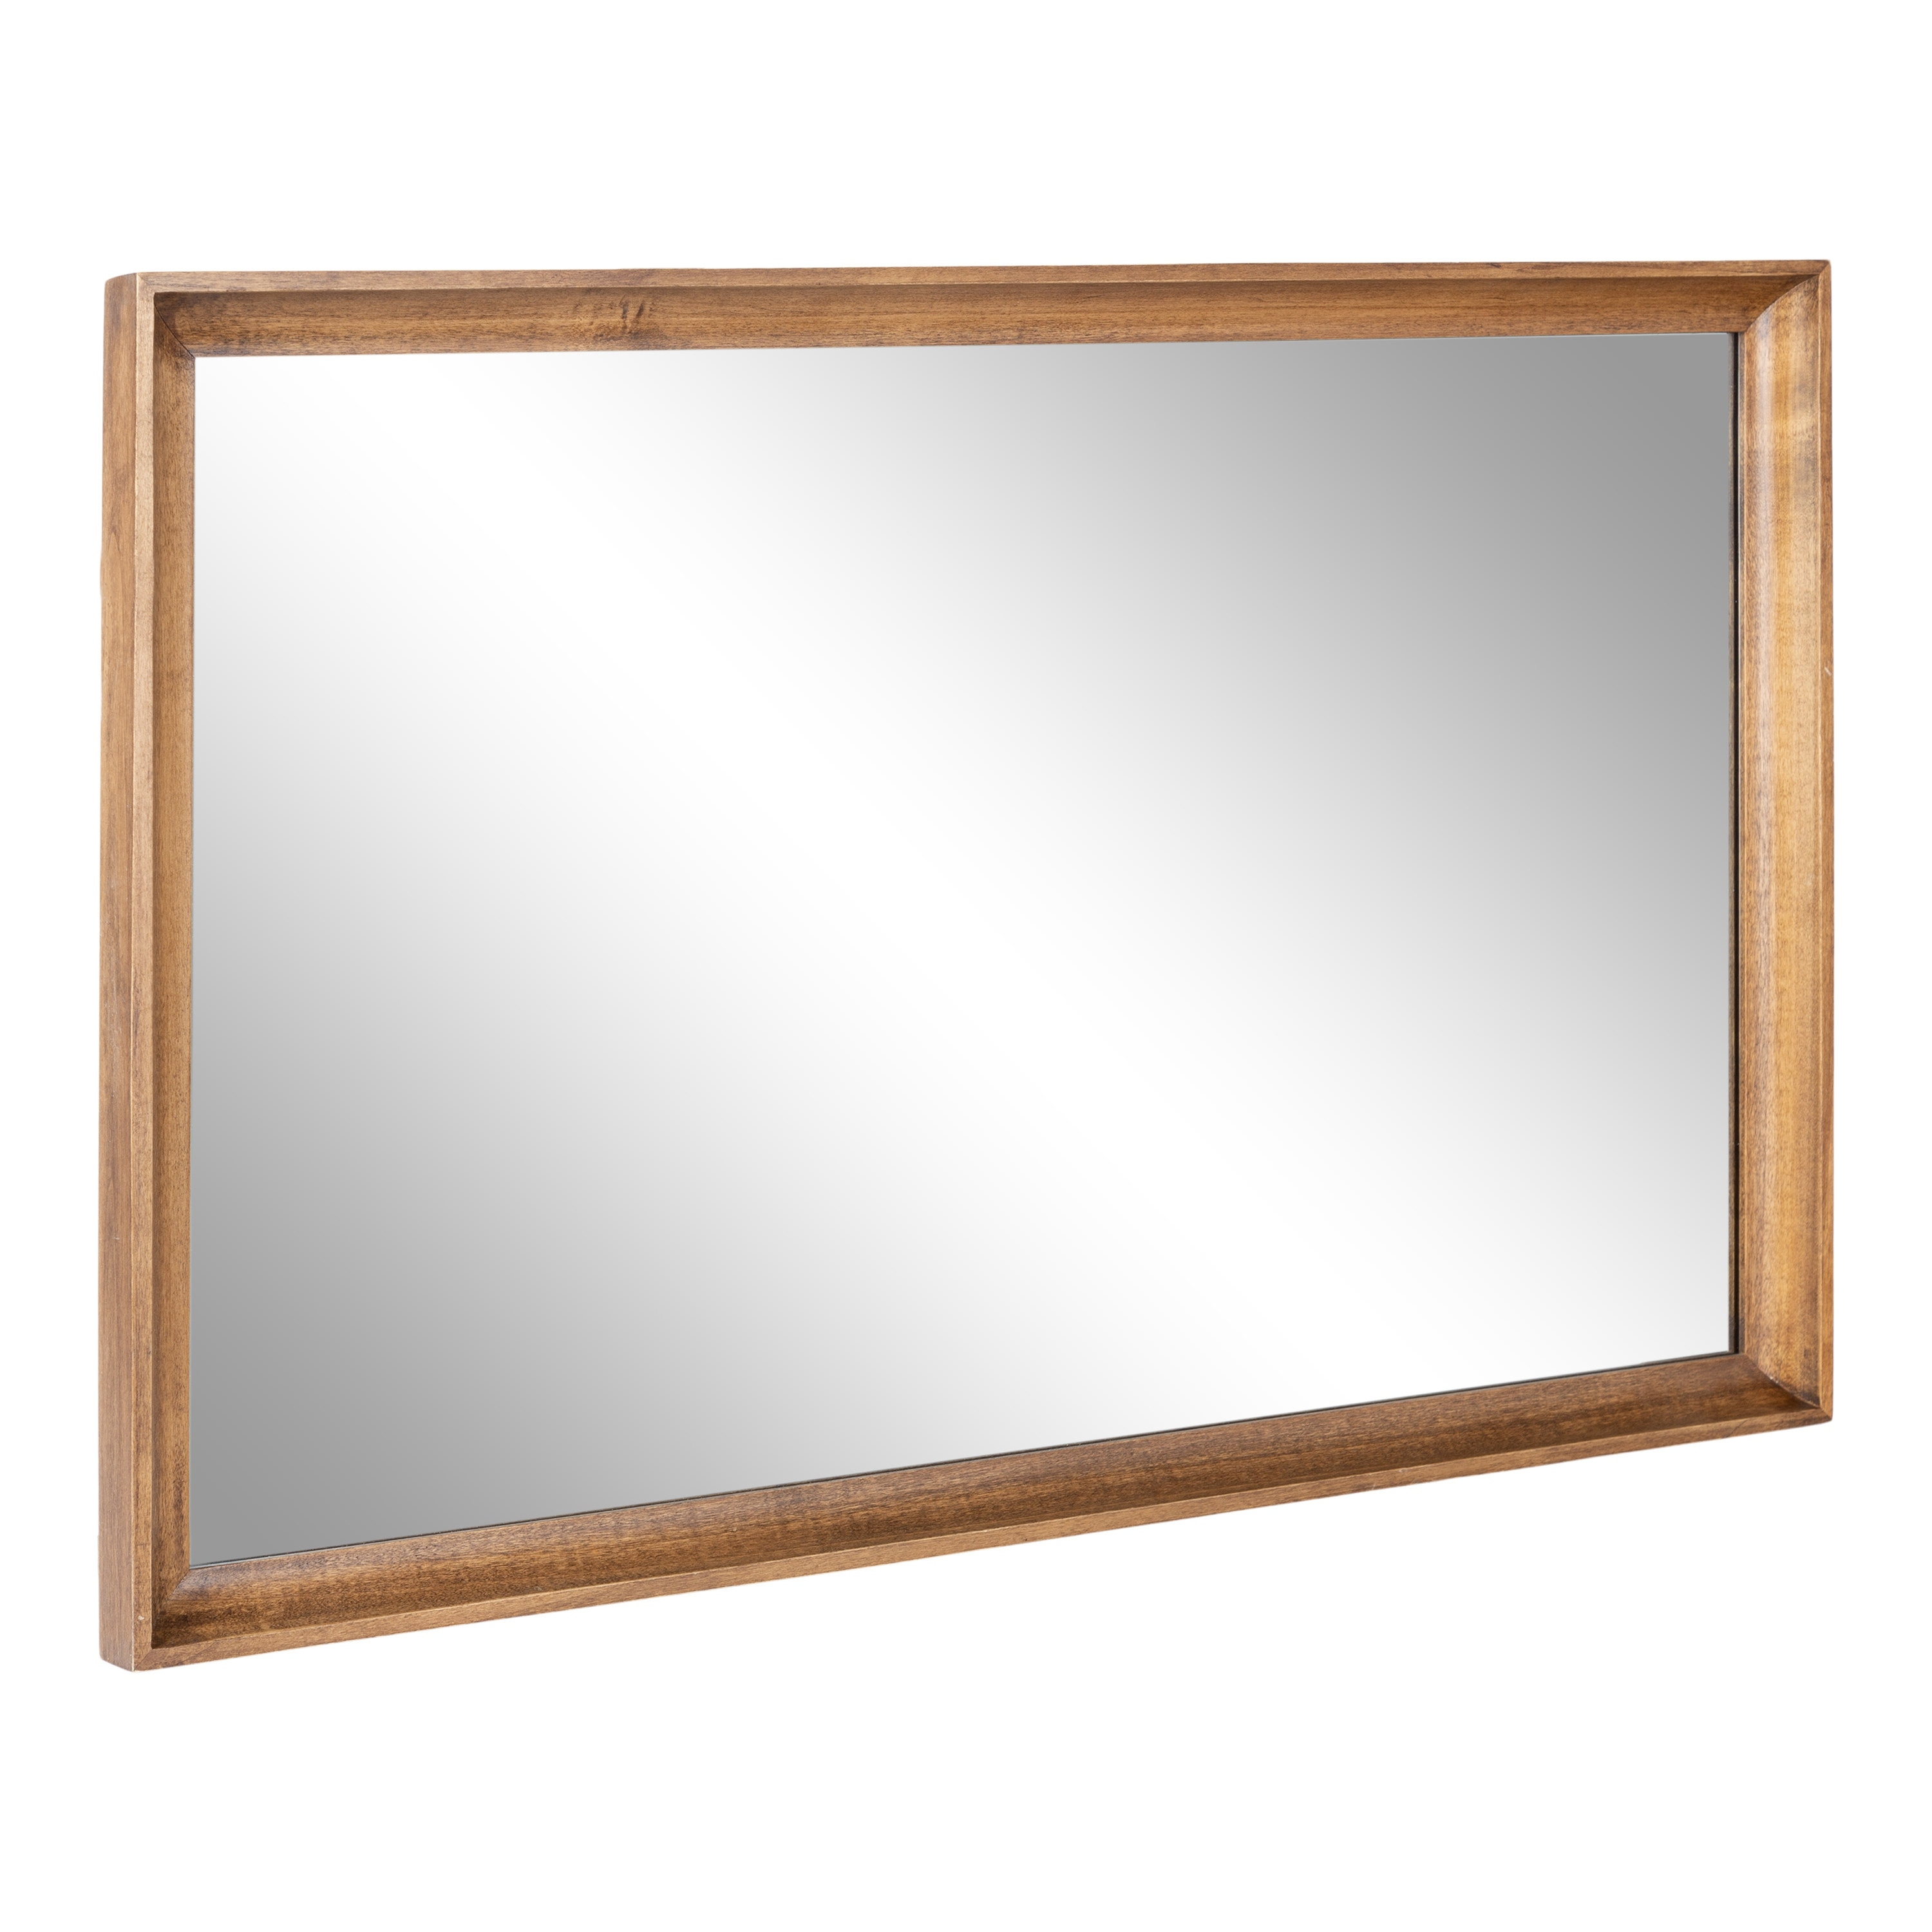 Kate and Laurel Hatherleigh Rectangle Wall Mirror - 24x36